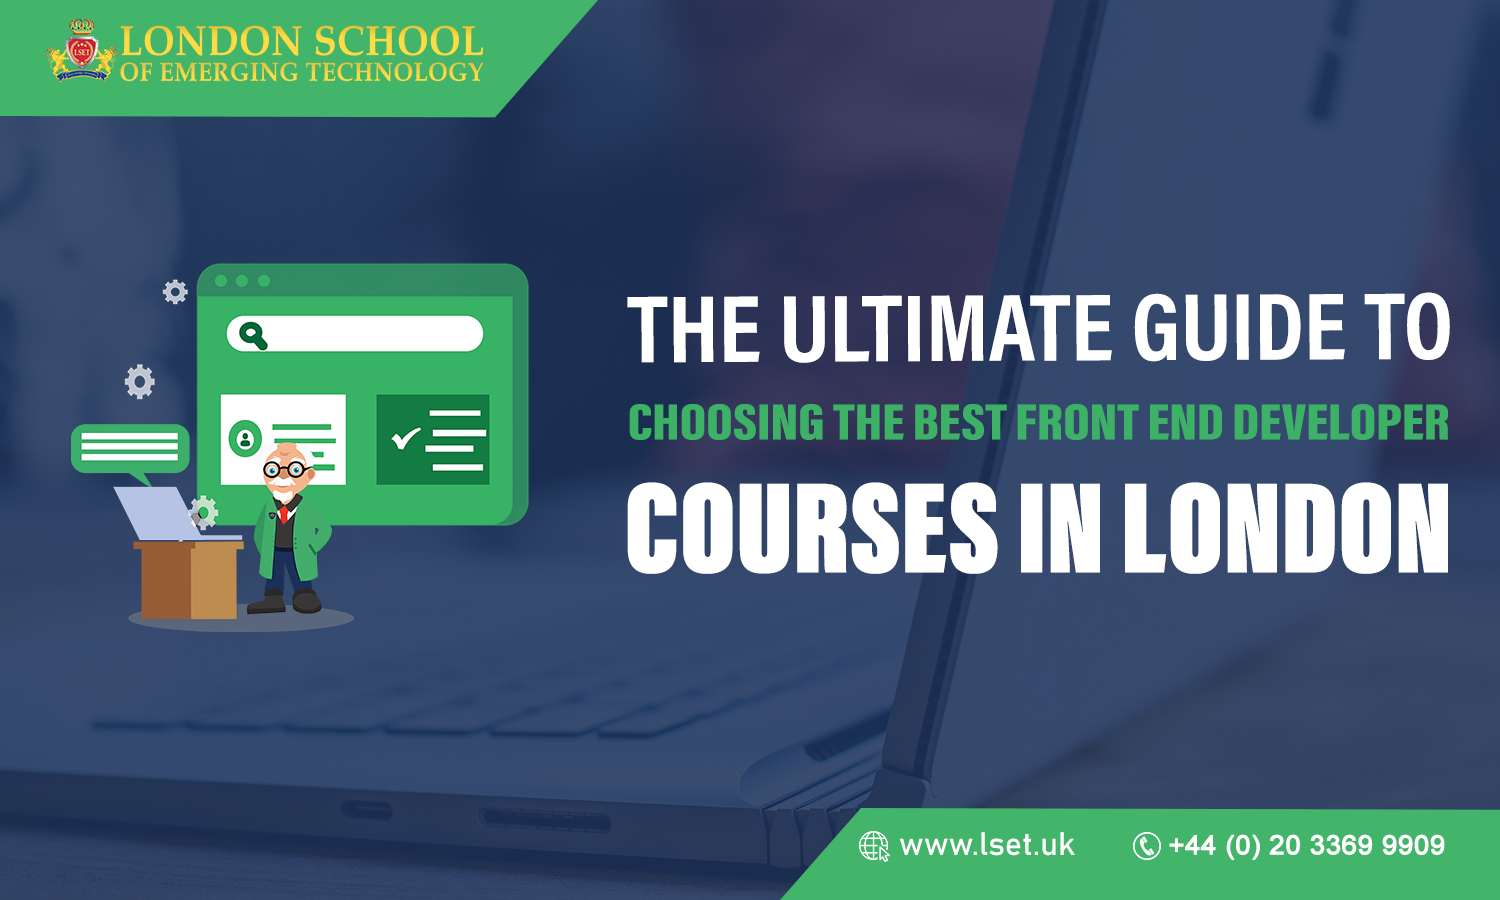 The Ultimate Guide to Choosing the Best Front End Developer Courses in London 4.48.21 PM